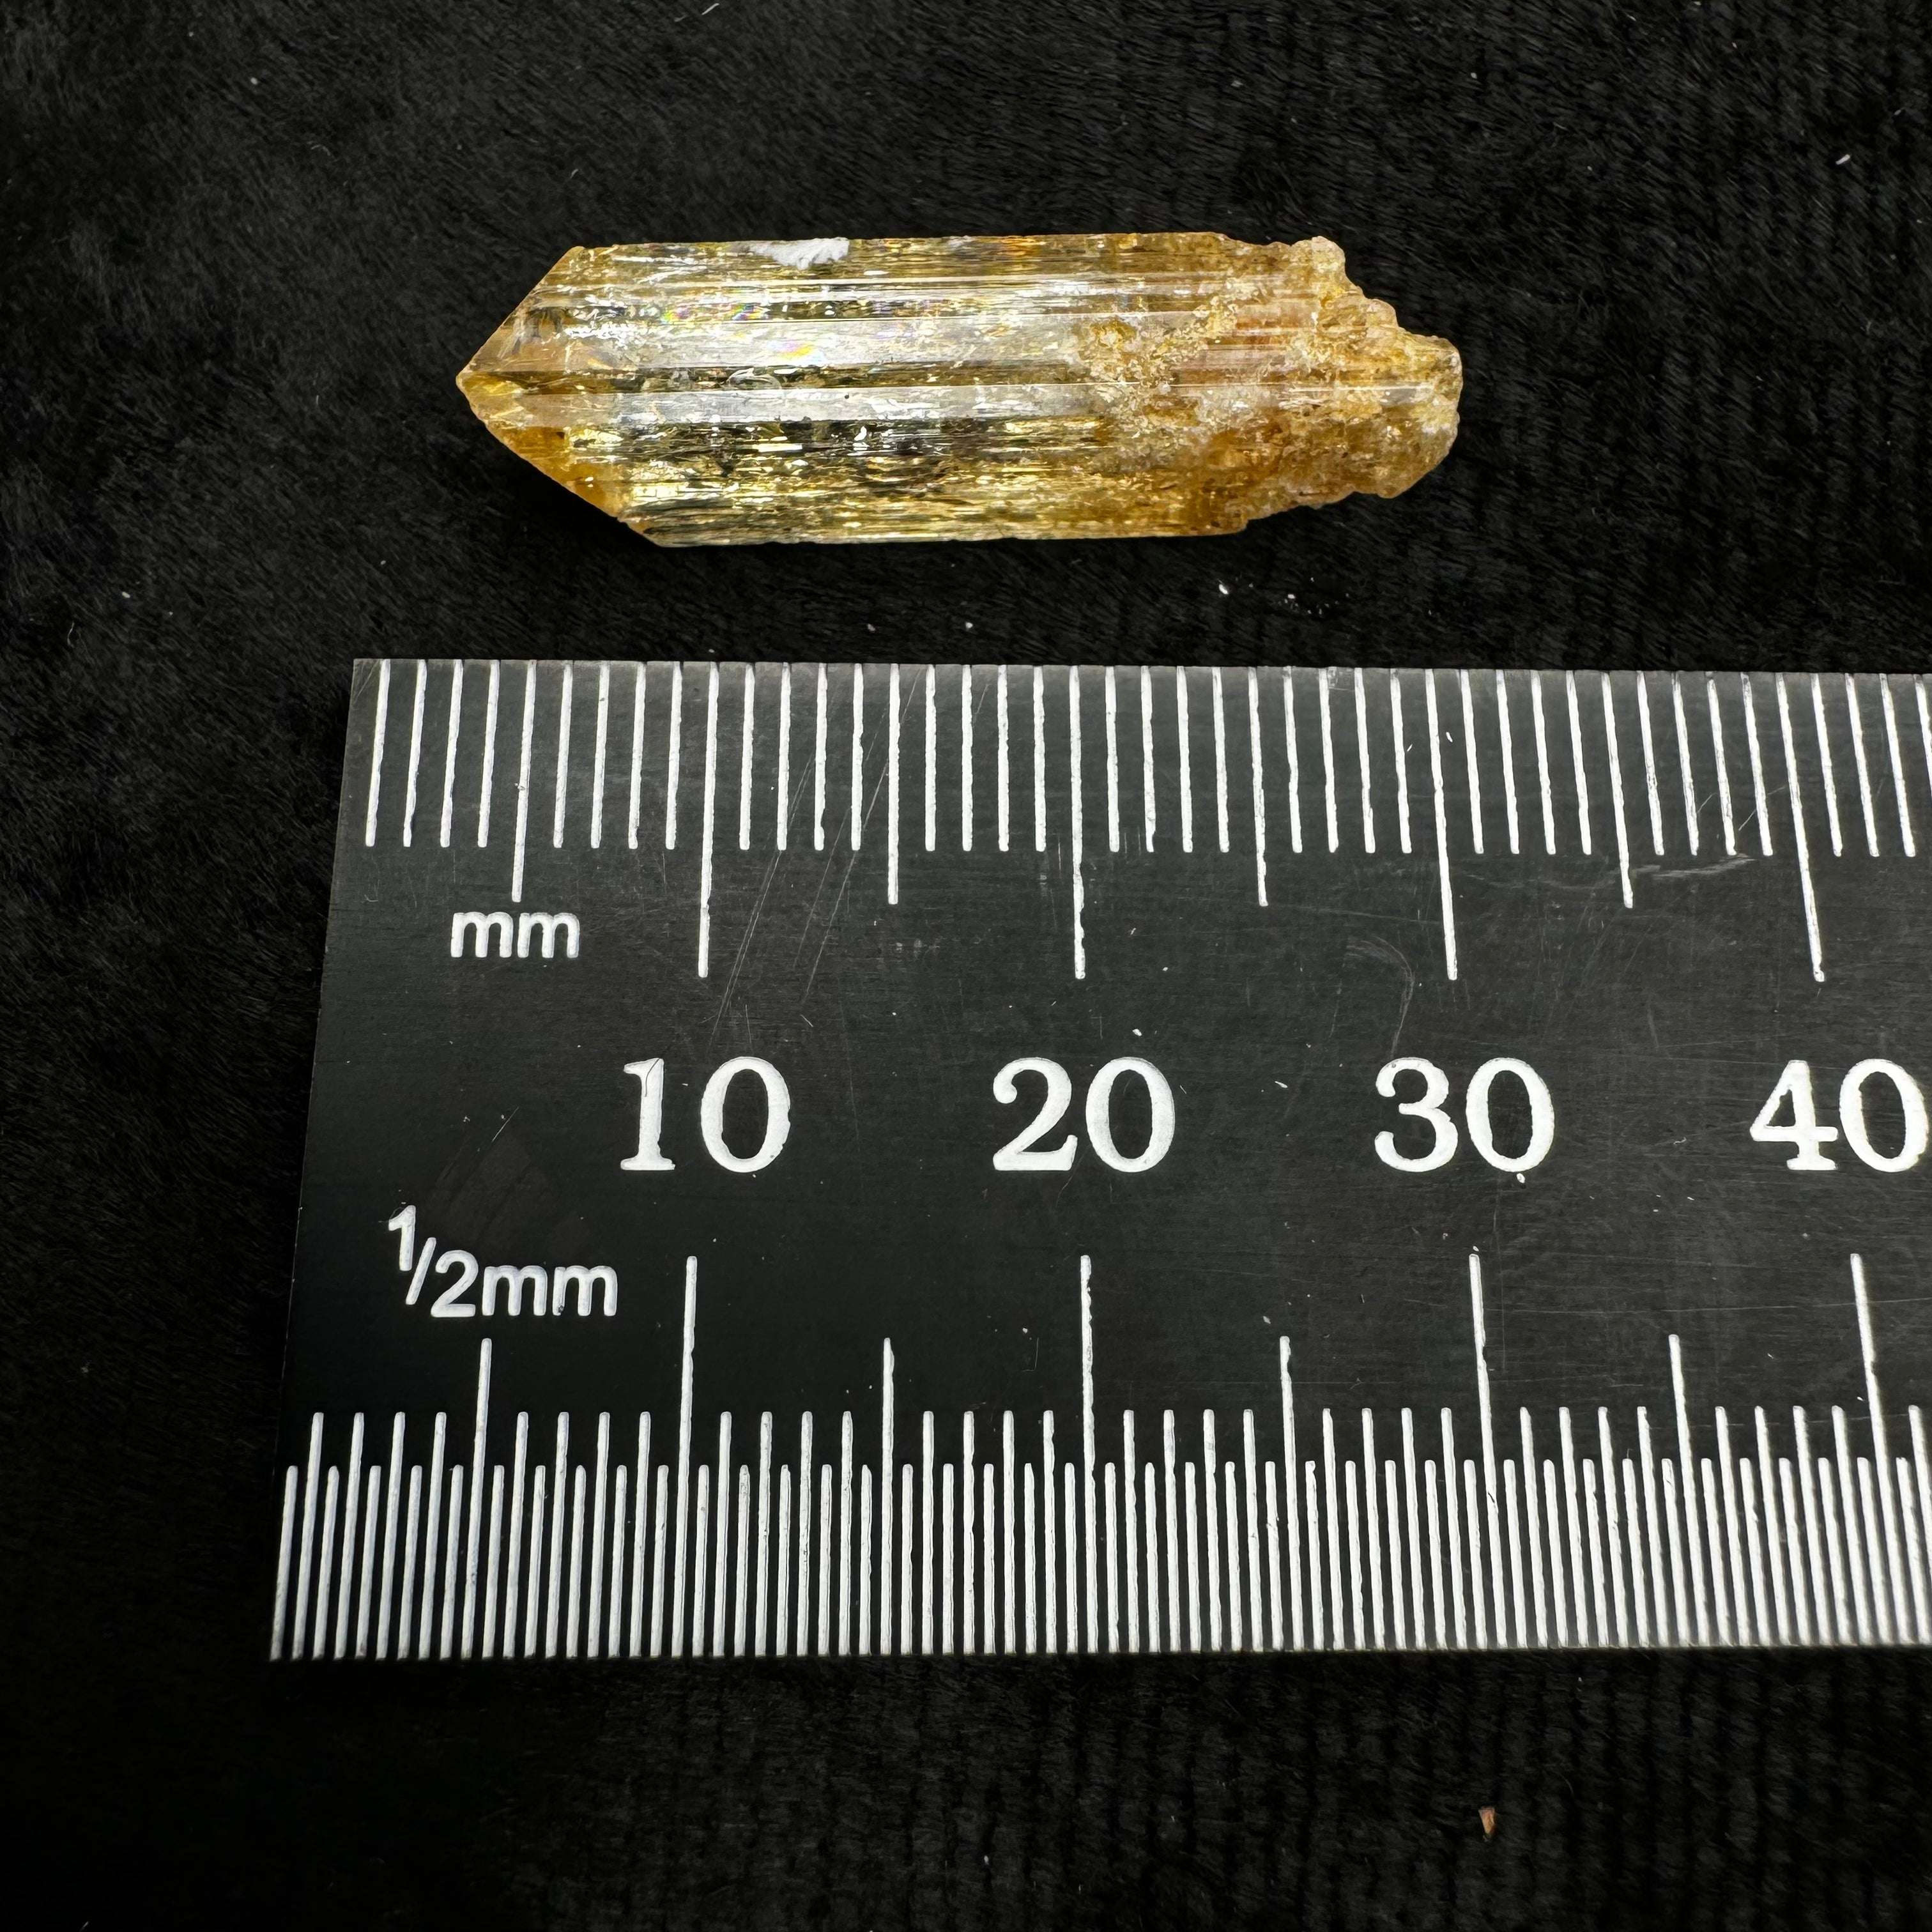 Imperial Topaz Natural Full Terminated Crystal - 198